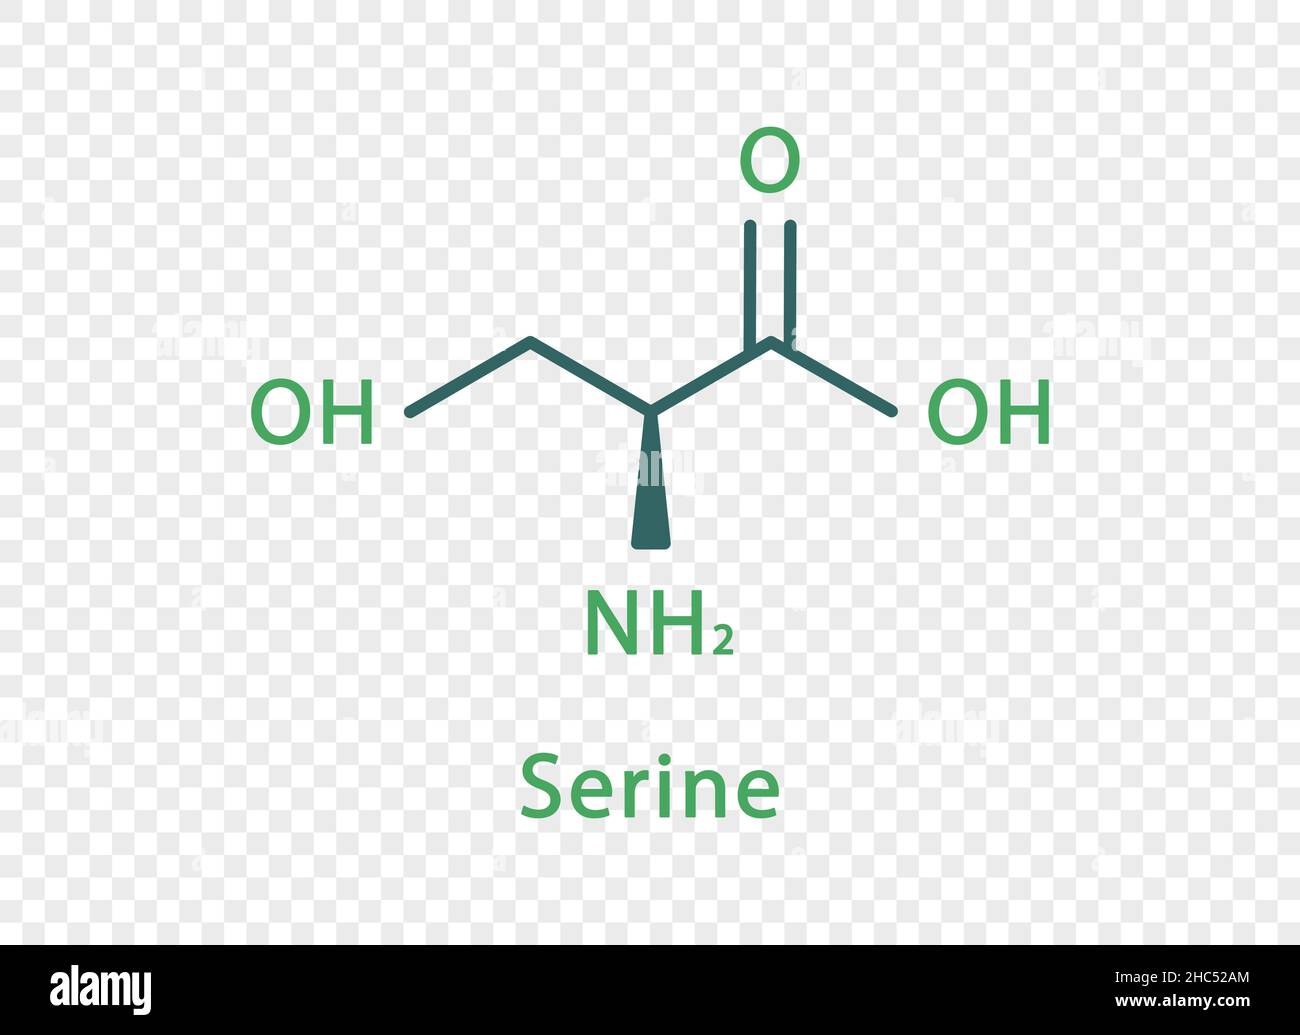 Serine chemical formula. Serine structural chemical formula isolated on transparent background. Stock Vector